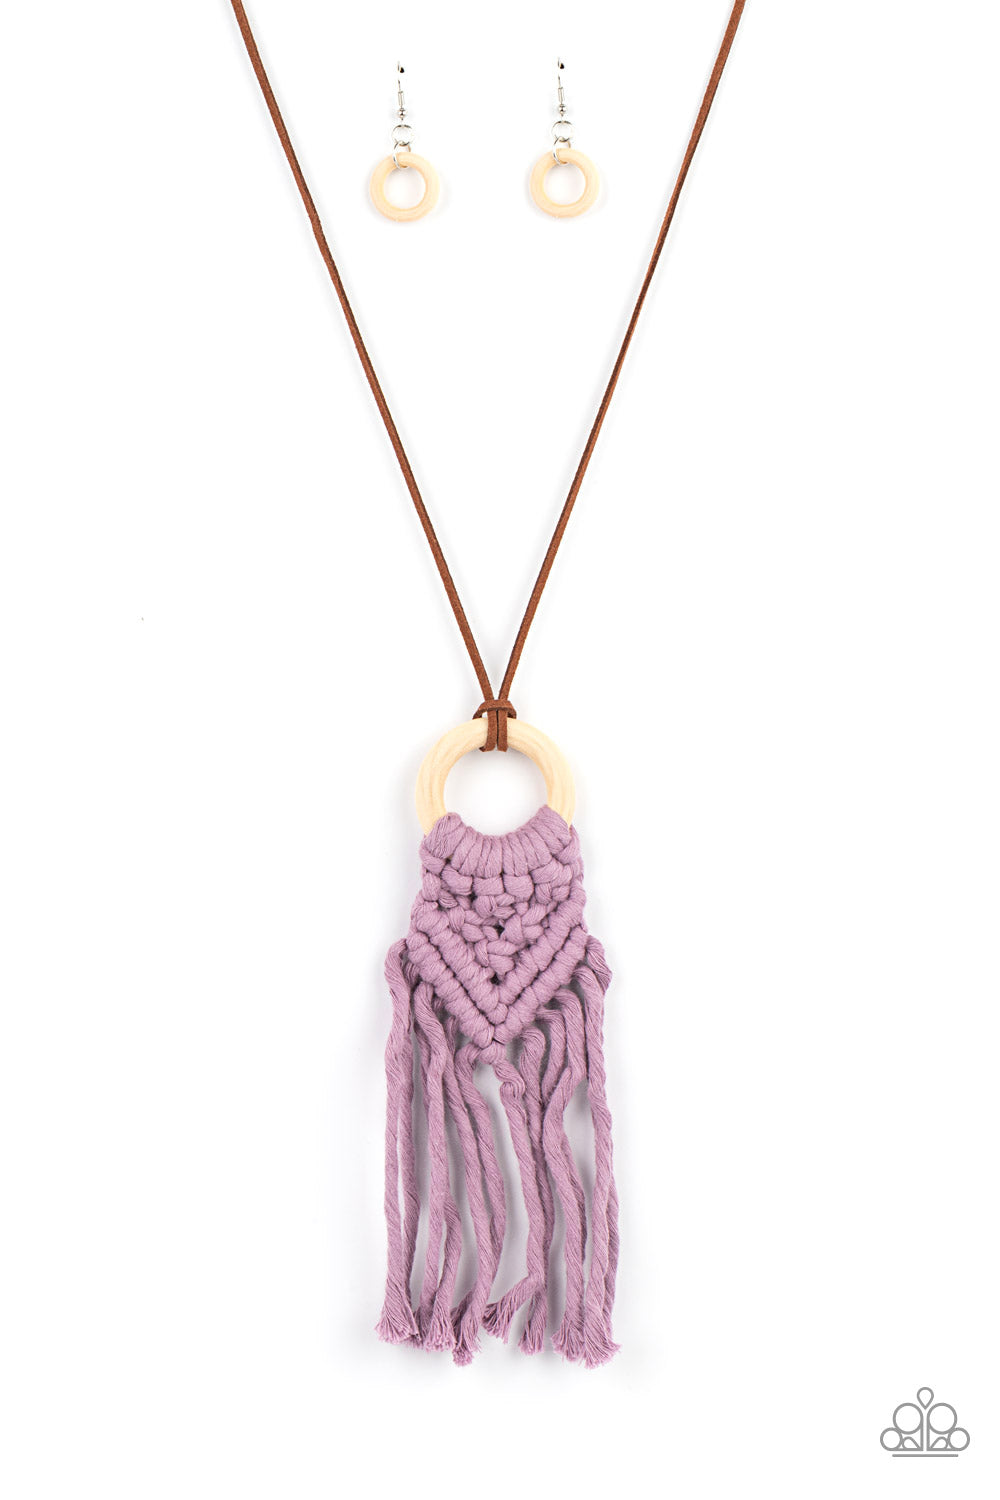 Paparazzi Accessories Crafty Couture - Purple Macrame Necklaces - Lady T Accessories